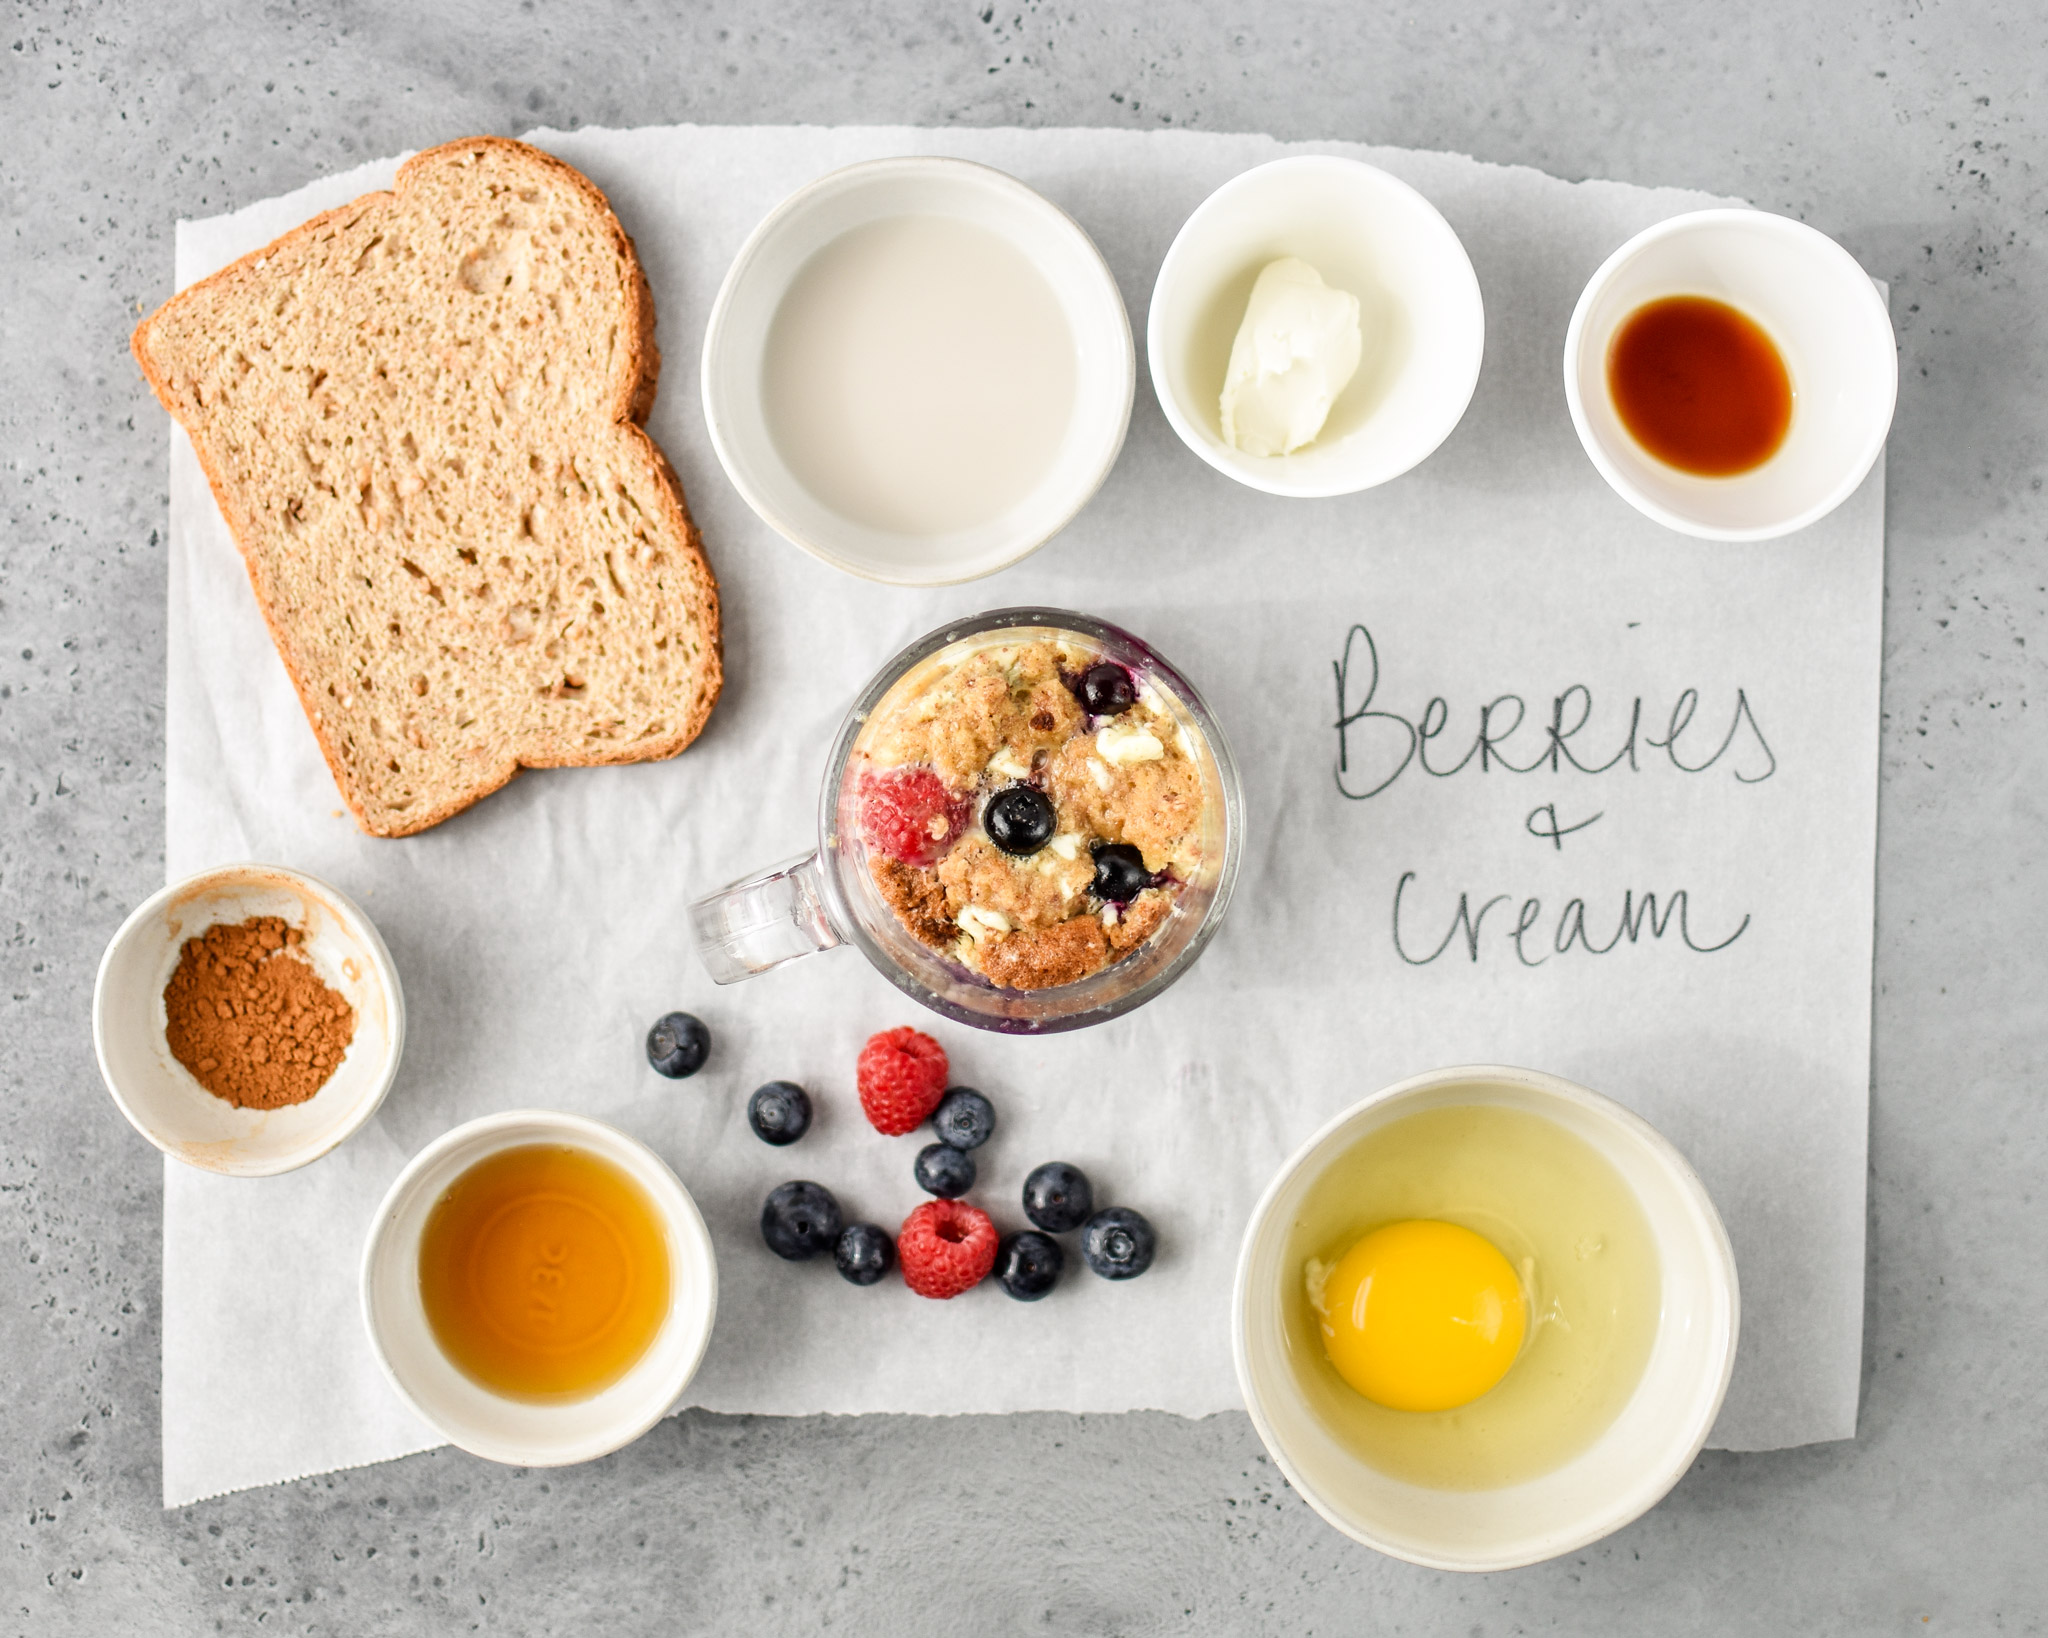 ingredients for the berries & cream microwave mug french toast